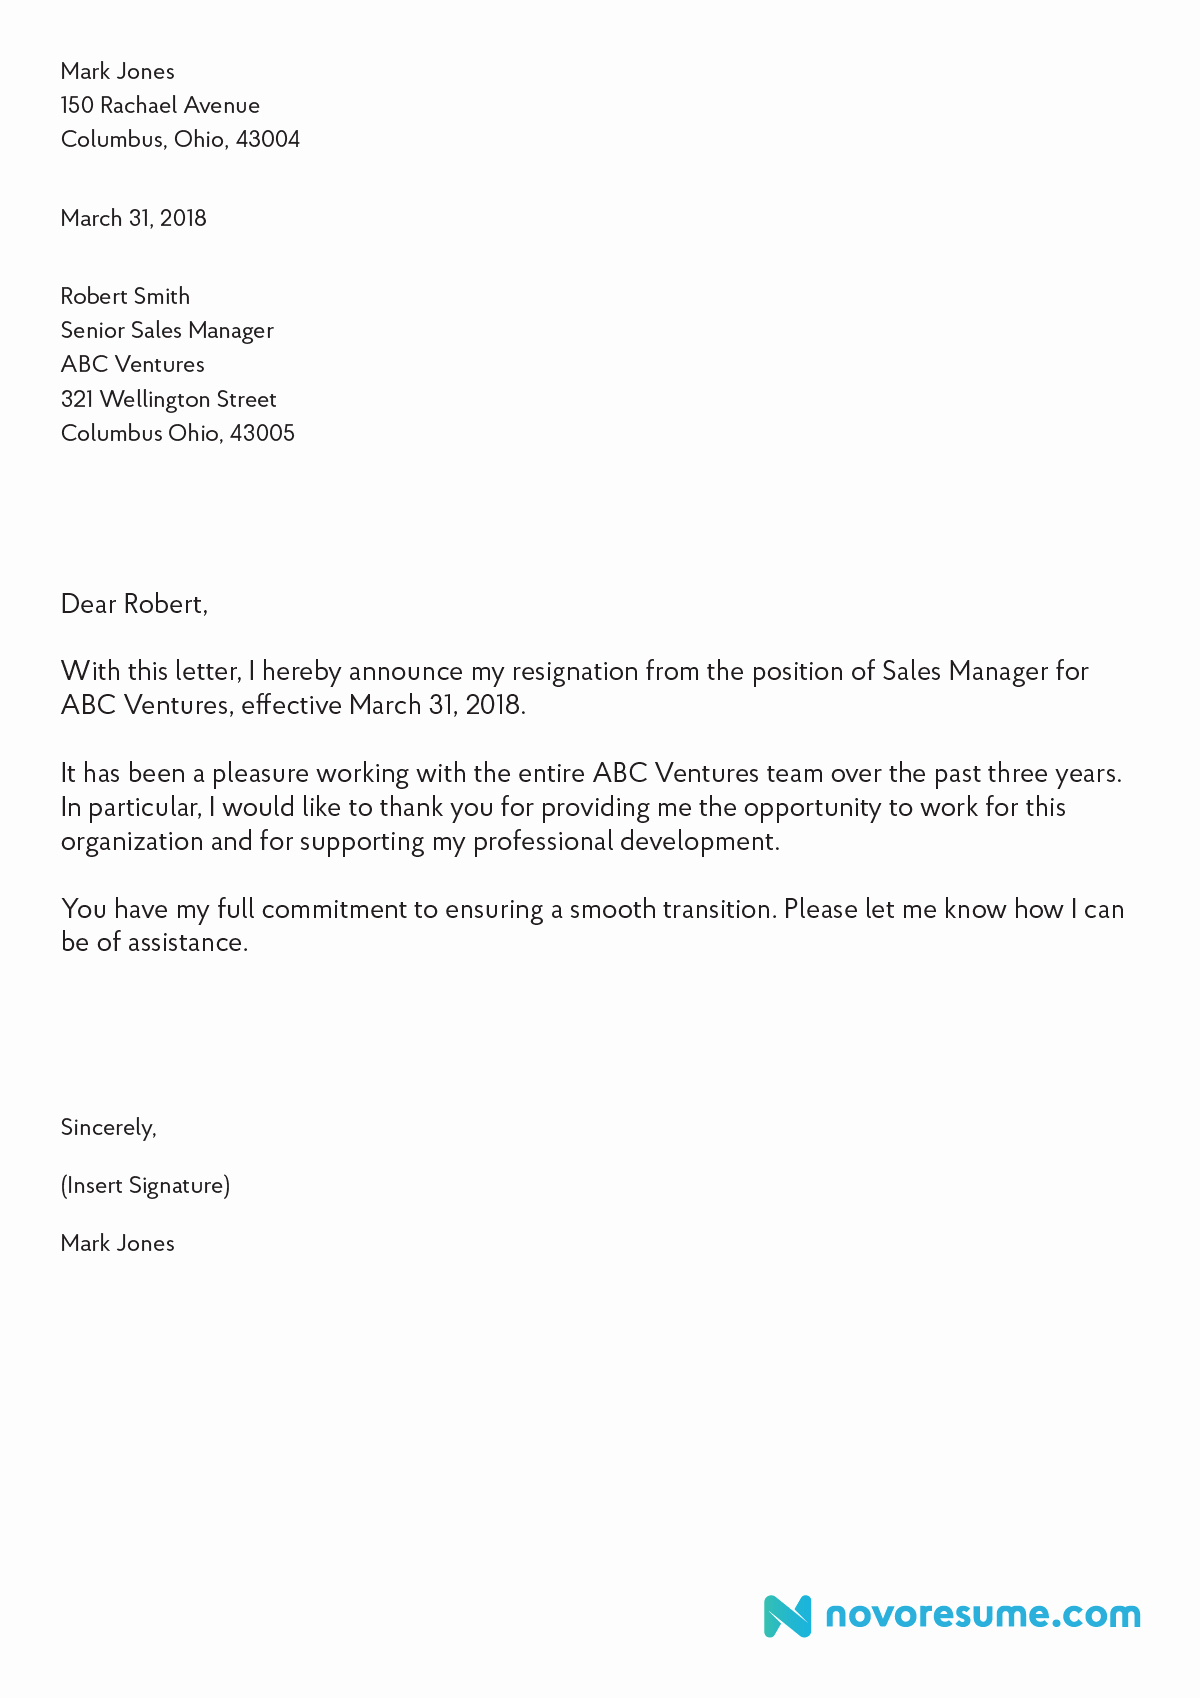 Resignation Letter for Work Best Of How to Write A Letter Of Resignation – 2019 Extensive Guide